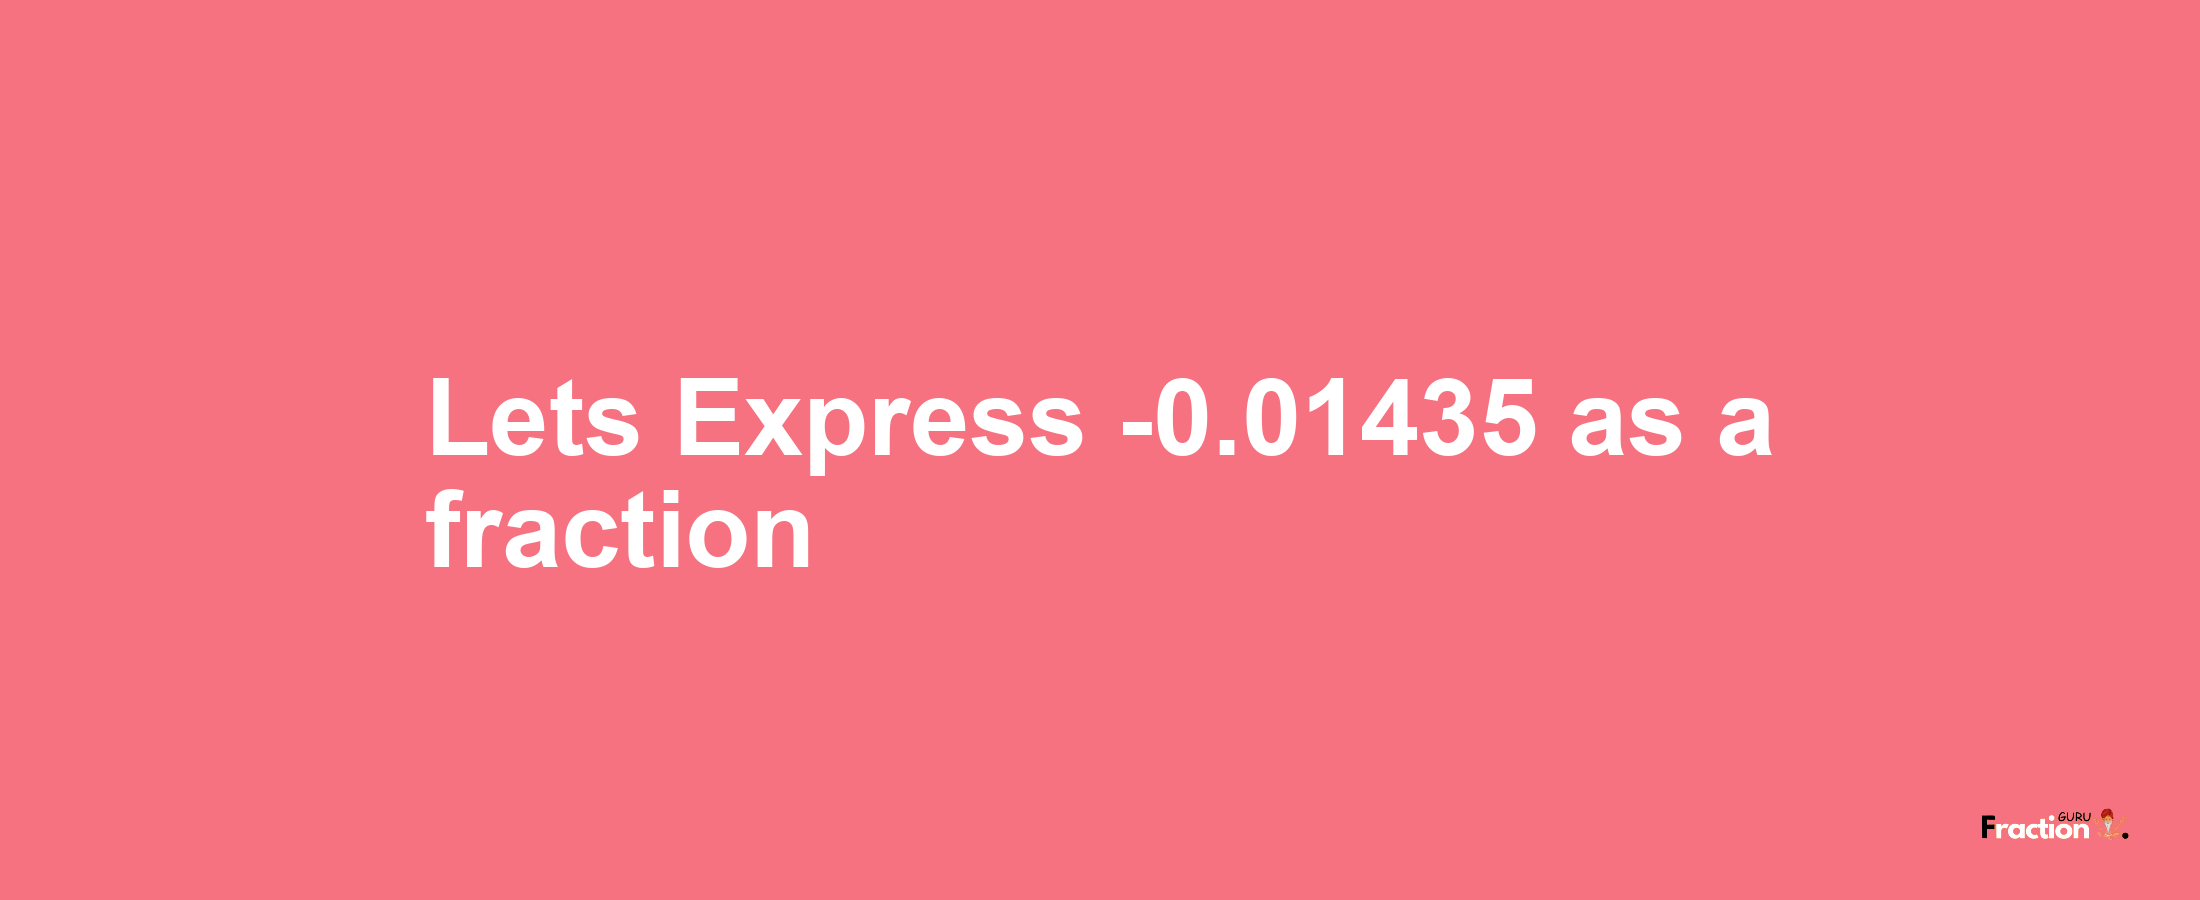 Lets Express -0.01435 as afraction